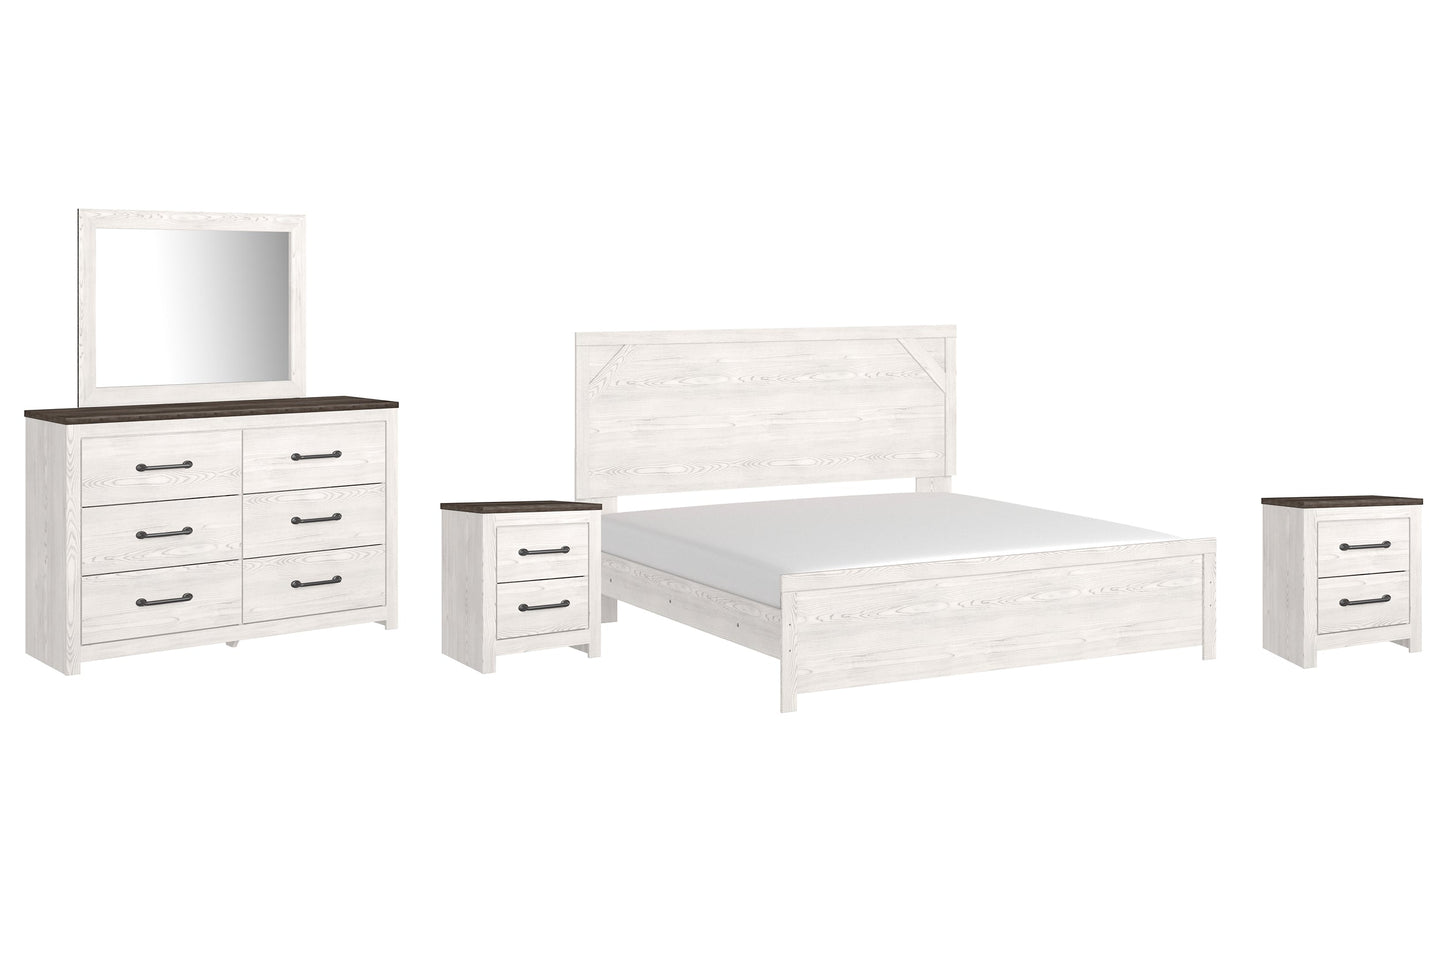 Gerridan King Panel Bed with Mirrored Dresser and 2 Nightstands at Walker Mattress and Furniture Locations in Cedar Park and Belton TX.